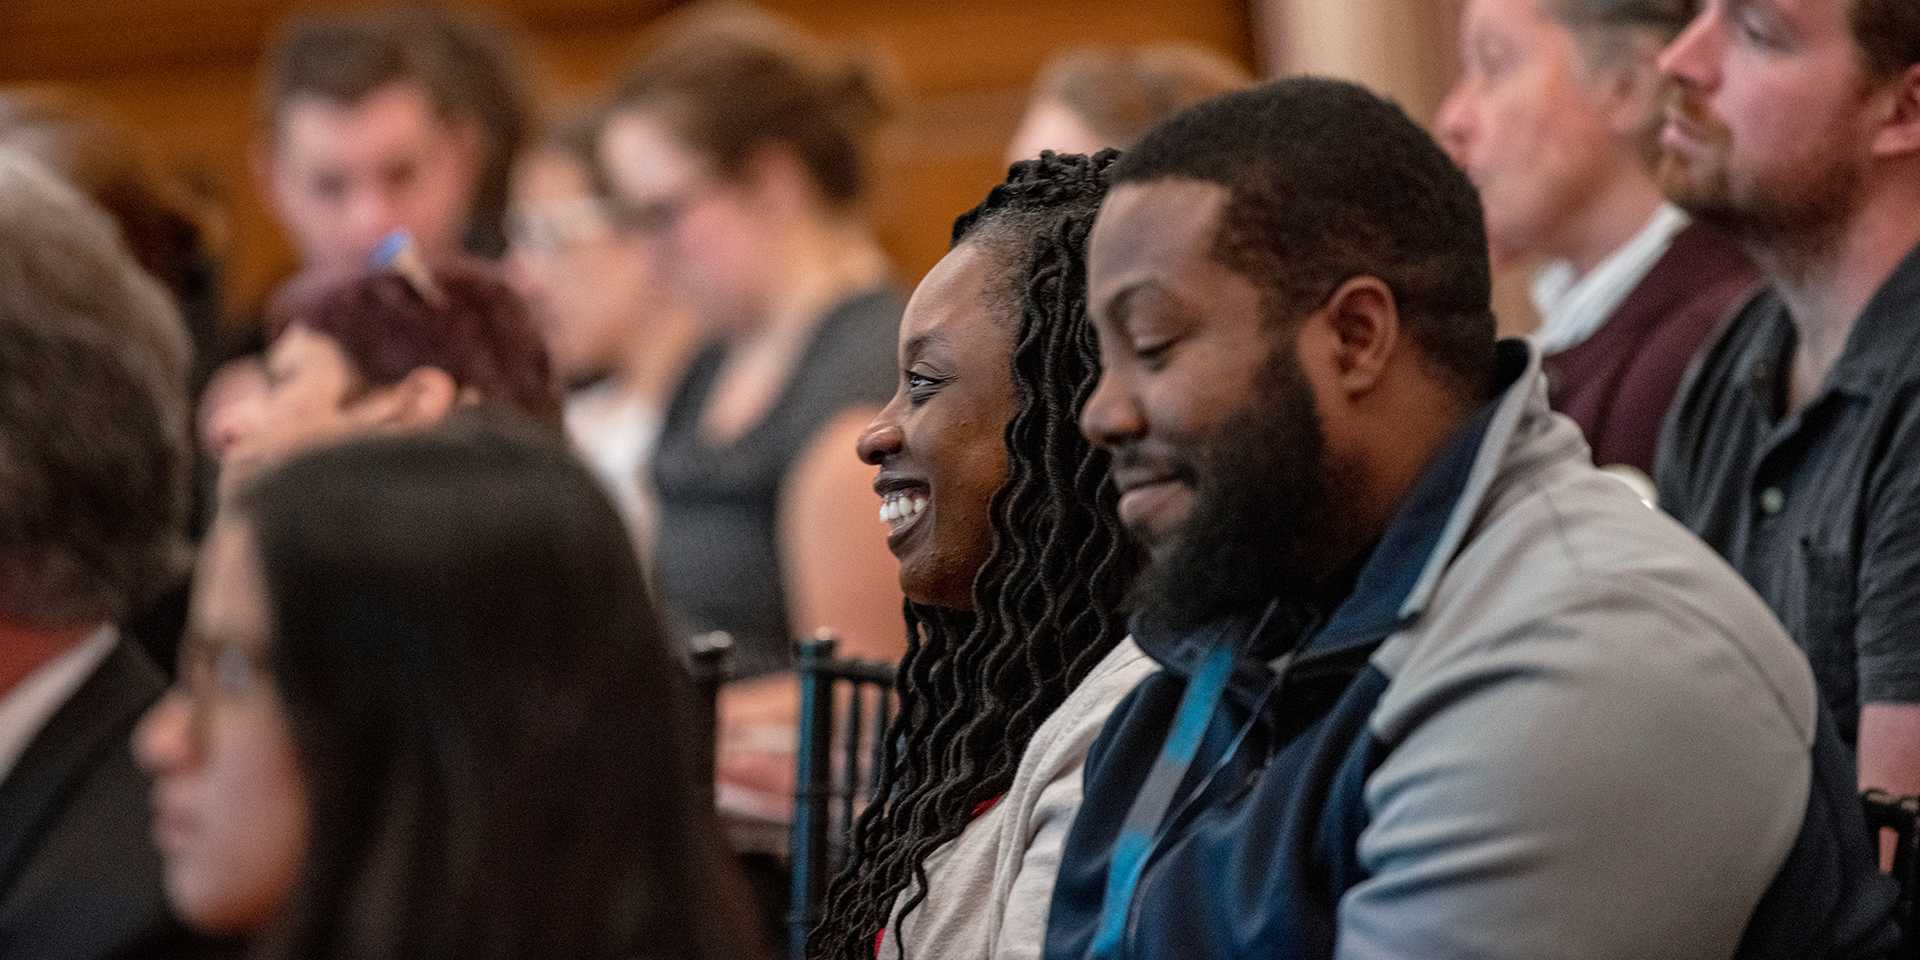 Two smiling people in a lecture crowd